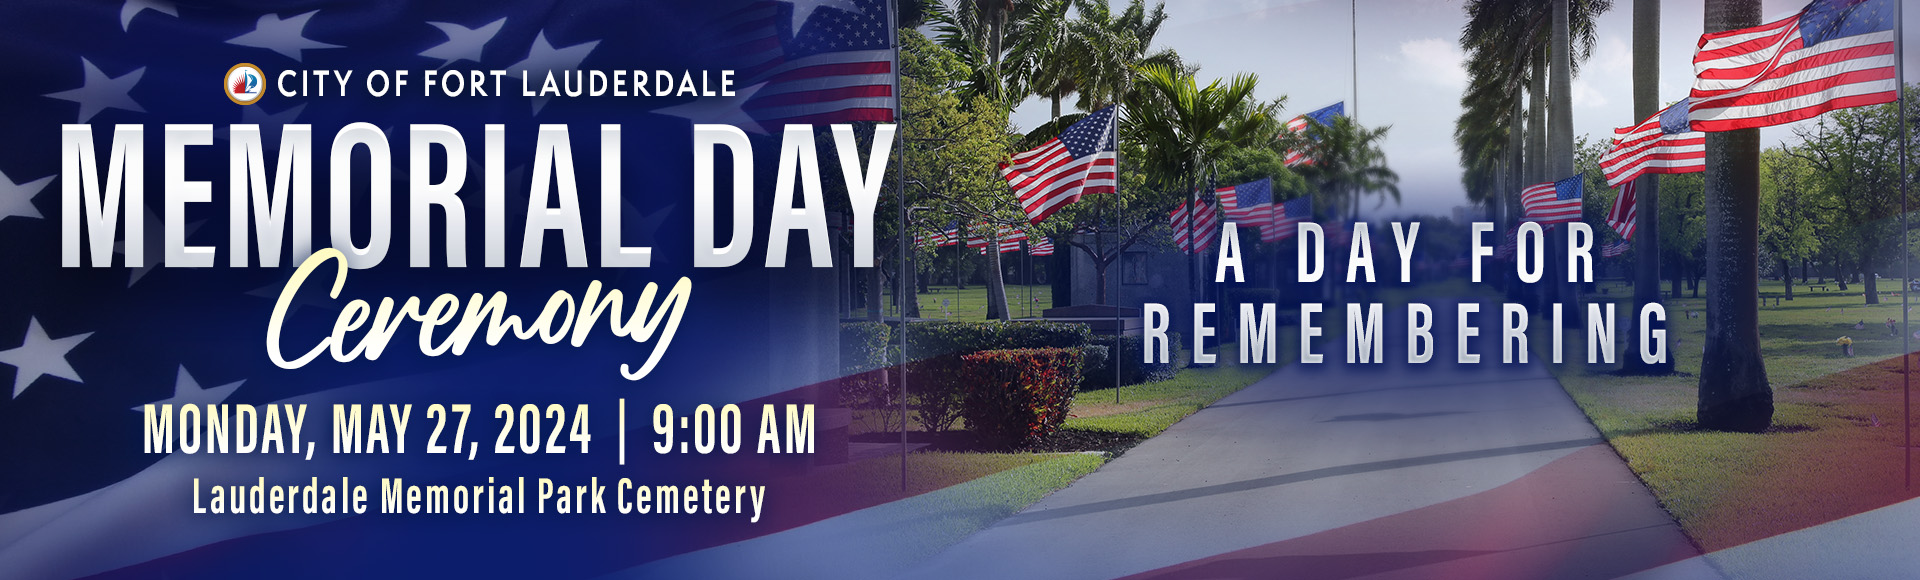 Memorial Day Ceremony. Monday, May 27. 9 AM. Lauderdale Memorial Cemetery image.